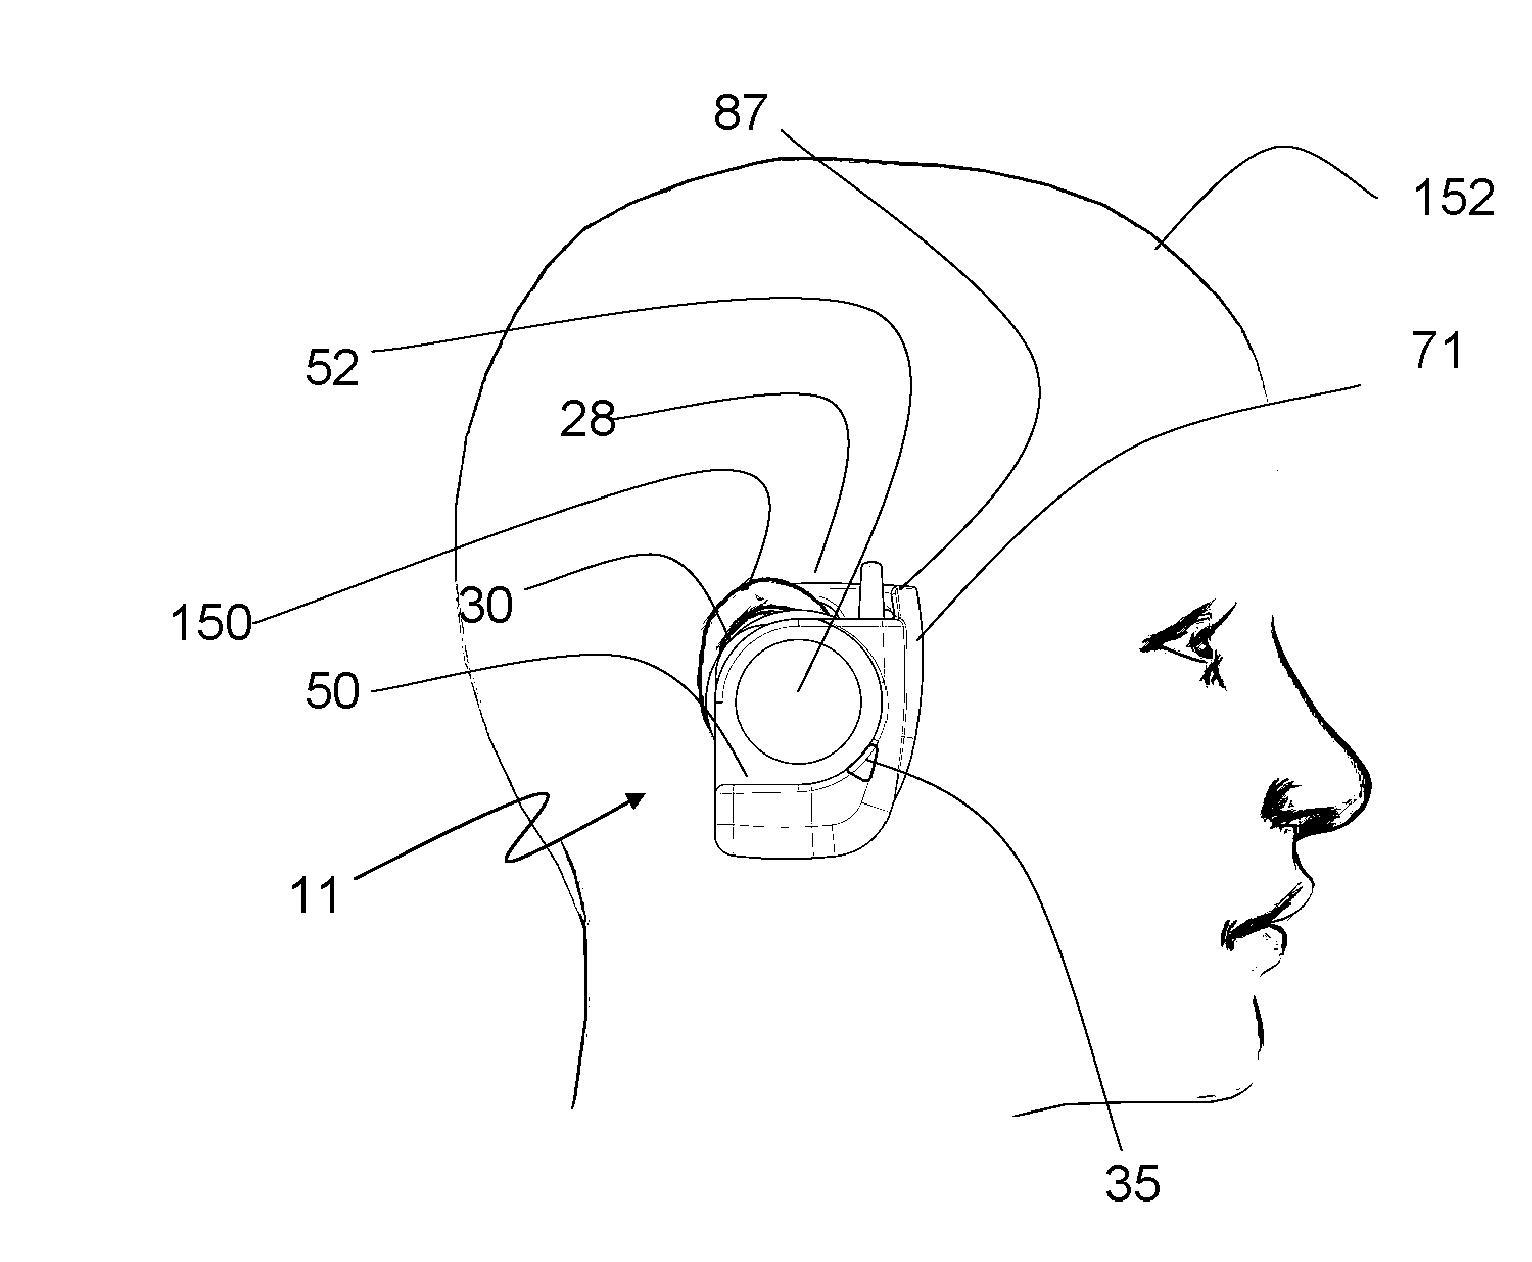 Spectator broadcast system with an ear mounted receiver